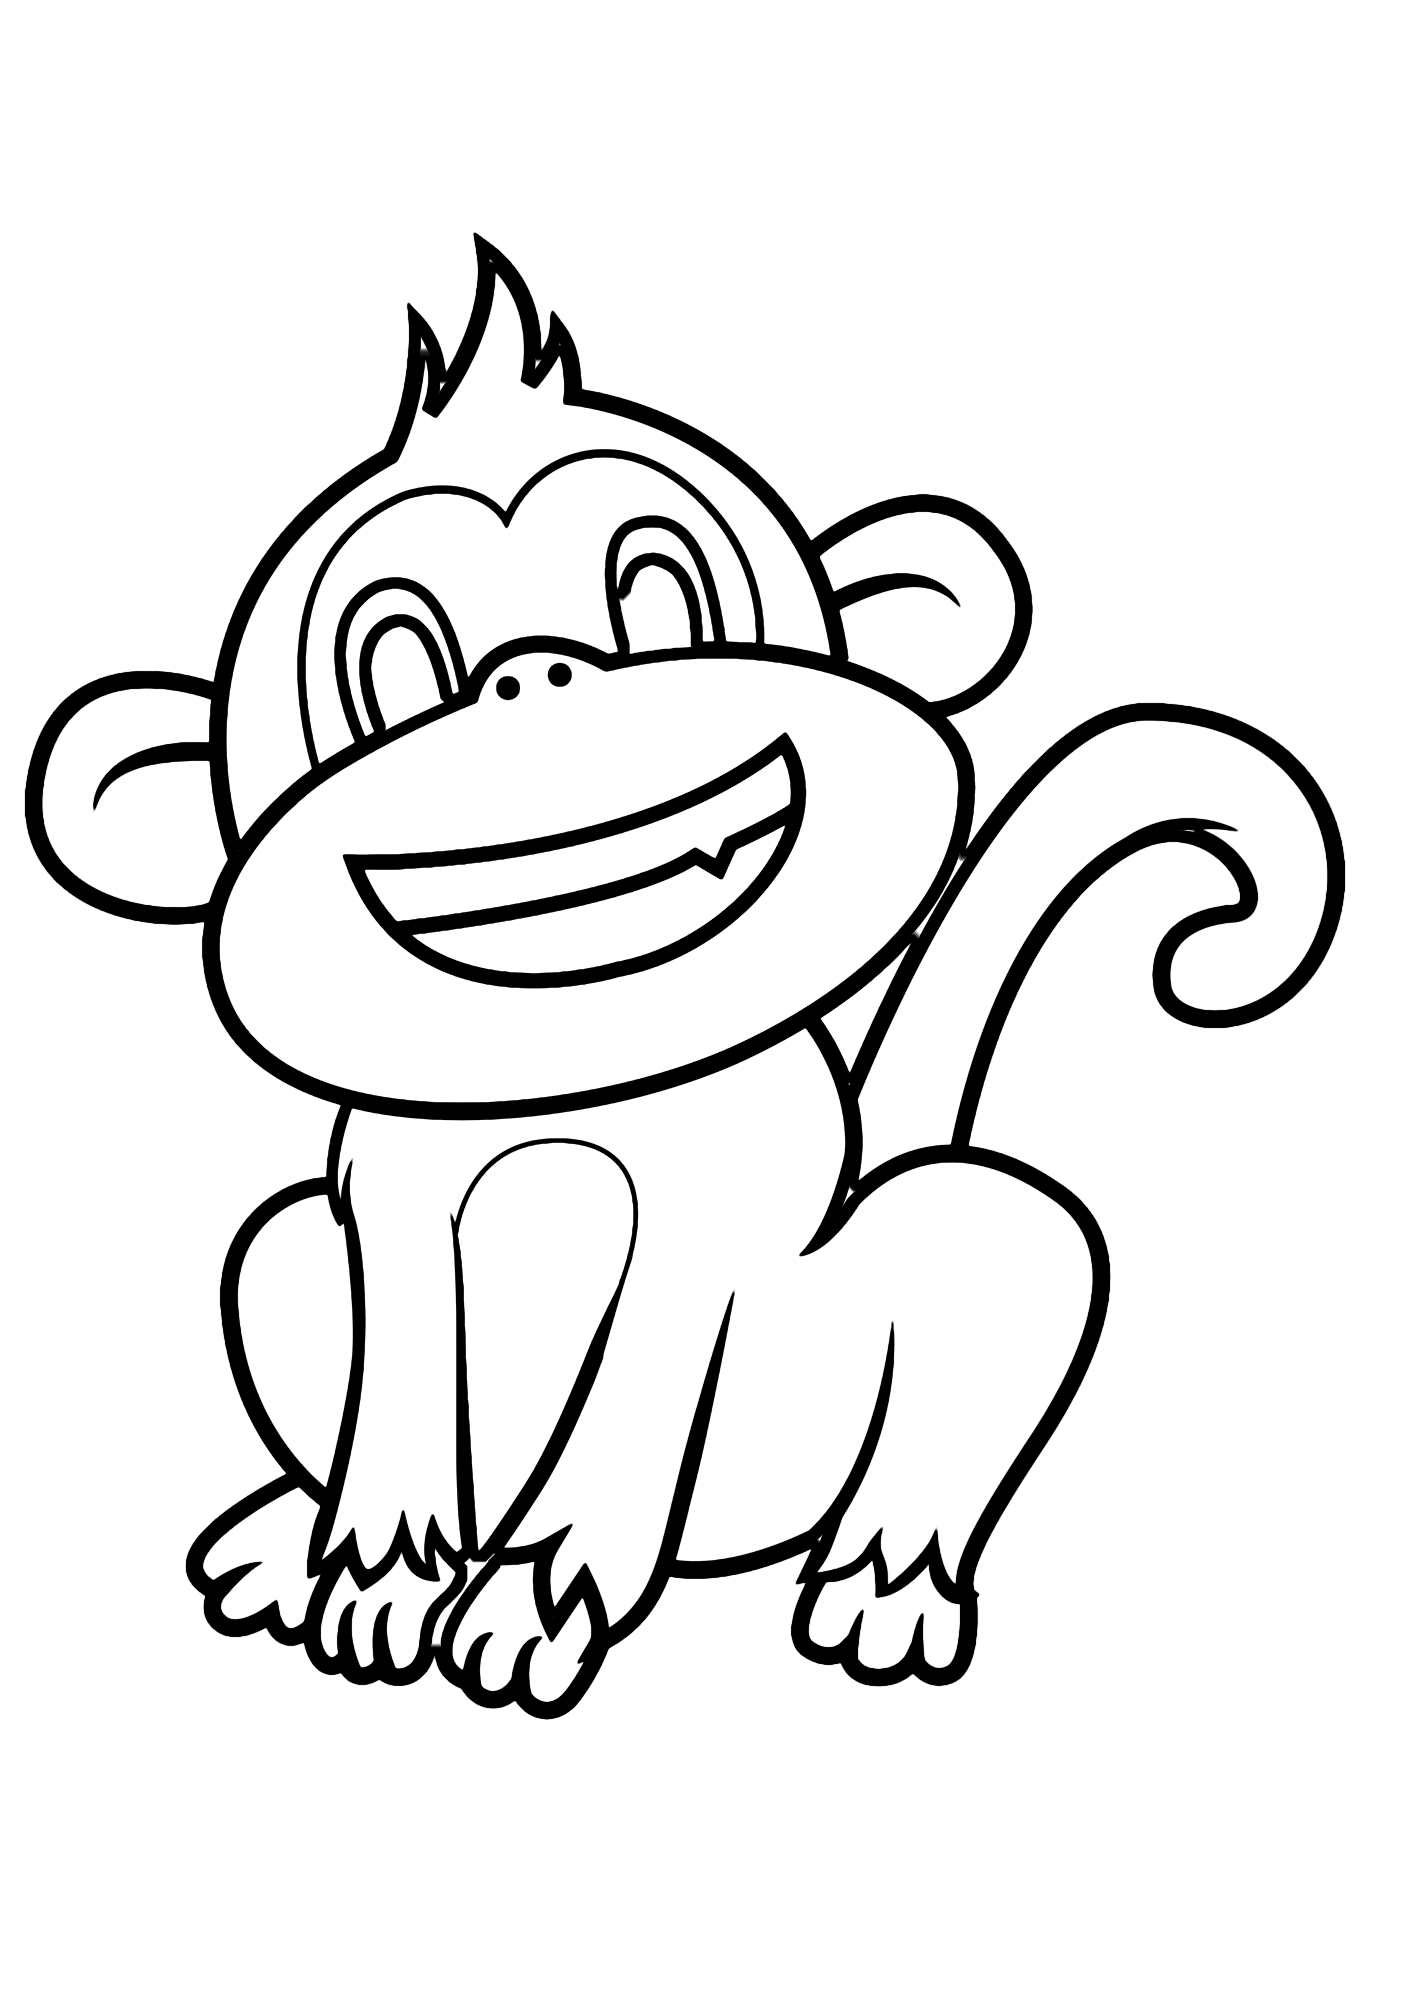 Monkey Smile Coloring Page